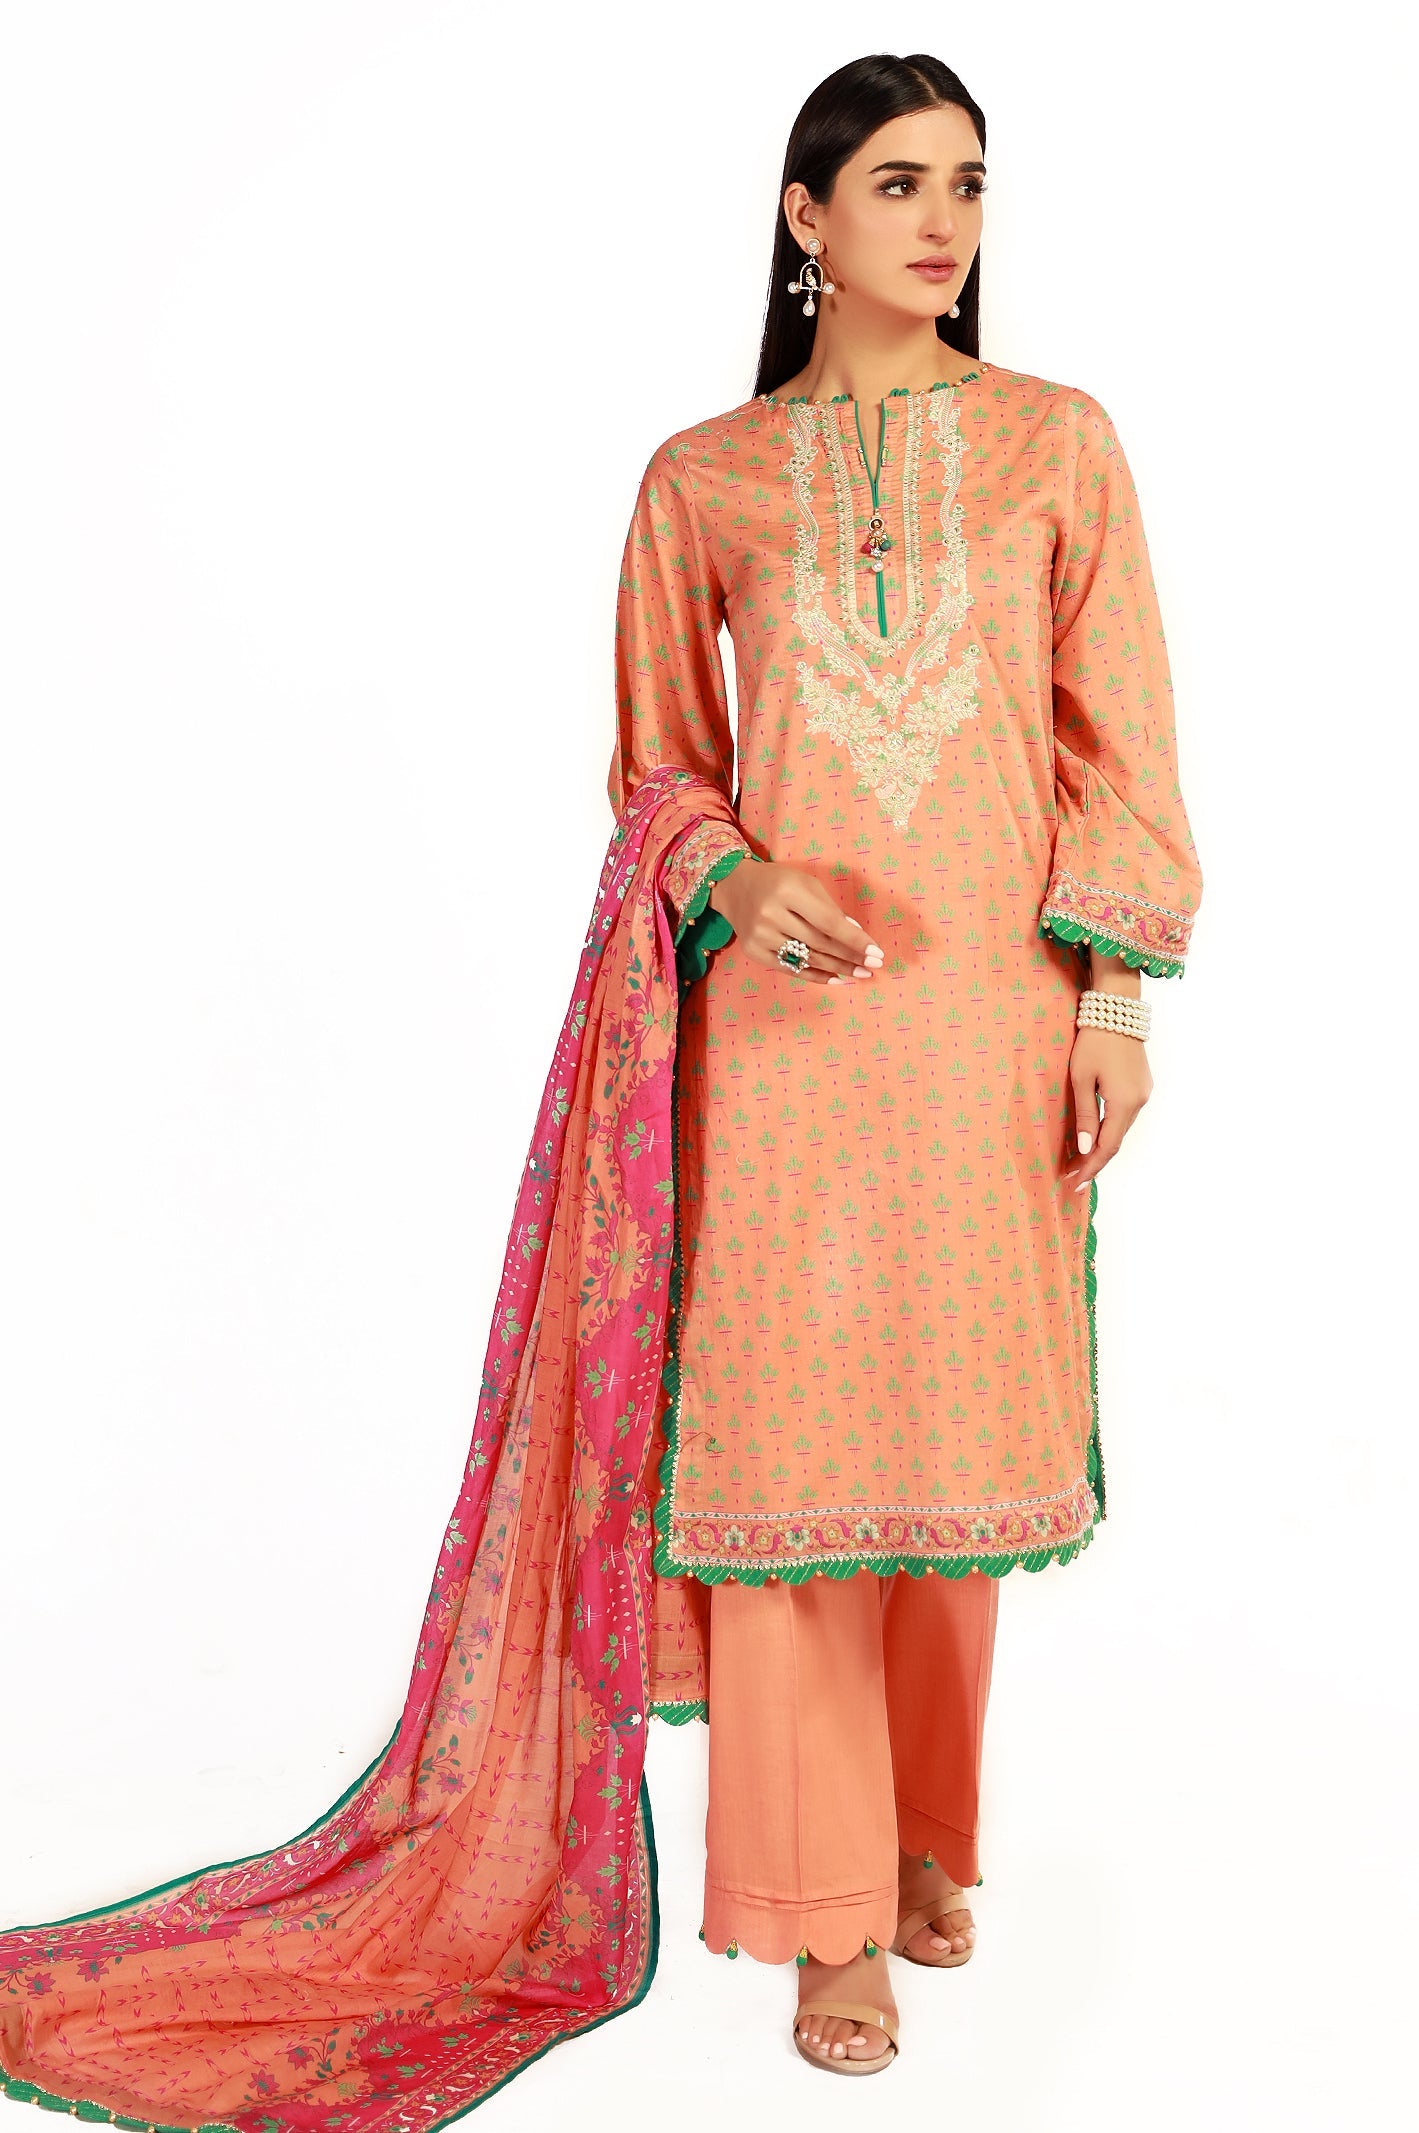 Unstitched 3 Piece Lawn Printed Emb Shirt, Lawn Printed Dupatta and Cotton Dyed Trouser - Diners